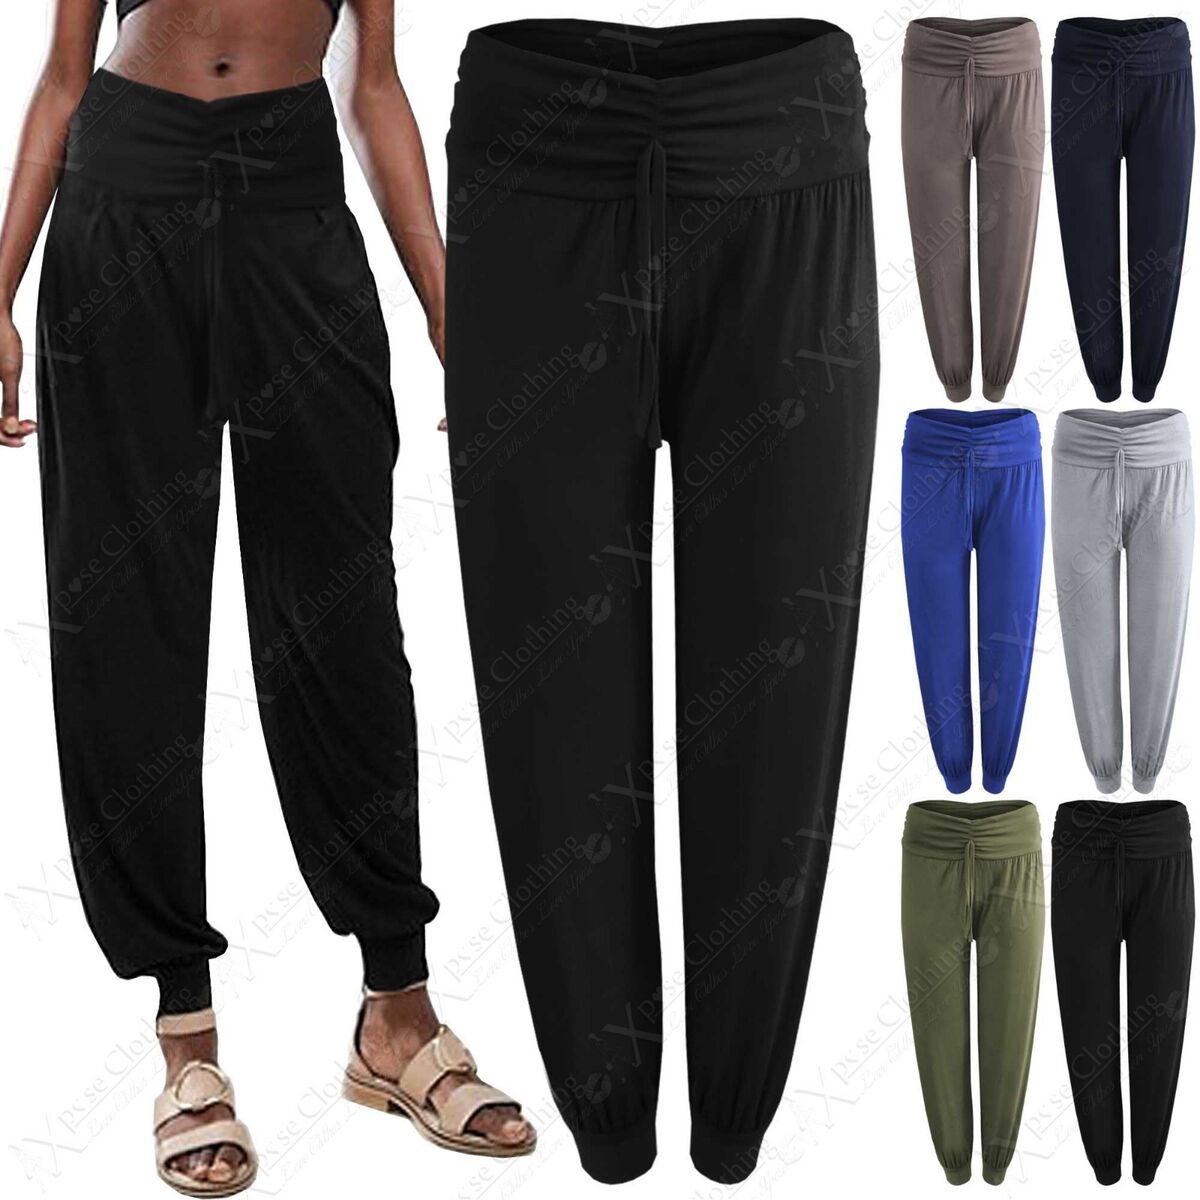 Women's travel pants that actually look good - Anywhere Apparel